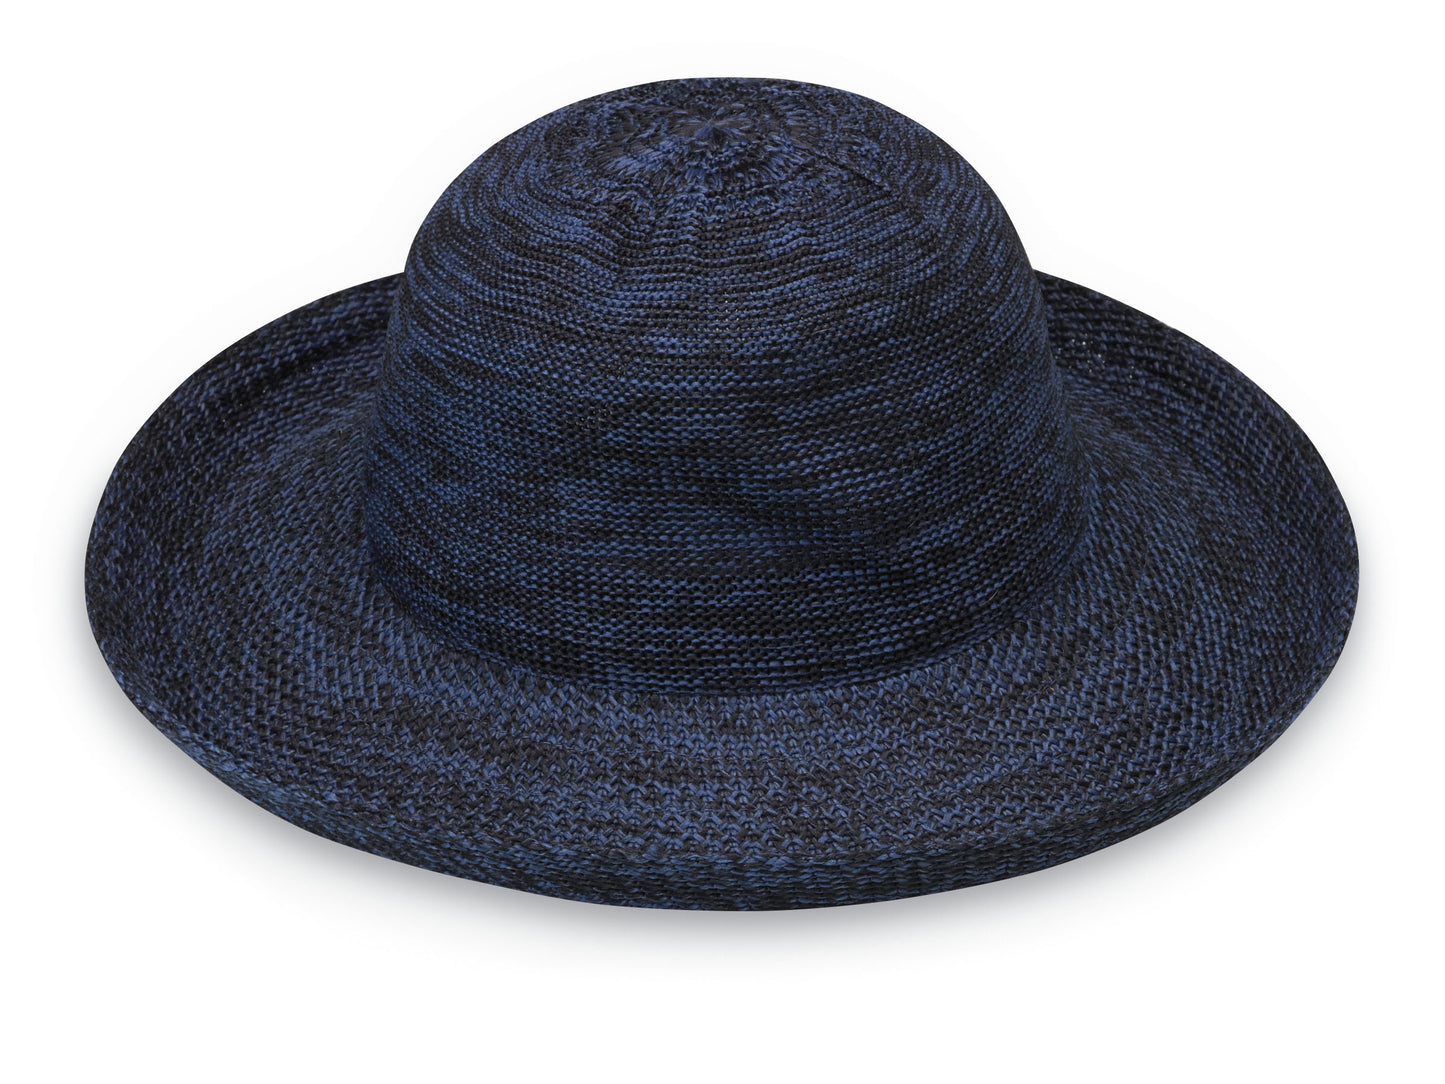 This packable navy beach hat not only offers UPF 50+ sun protection but is also recommended by the Skin Cancer Foundation. Its wide brim ensures stylish sun coverage, making it a travel-friendly and fashionable addition to your personal fashion collection.